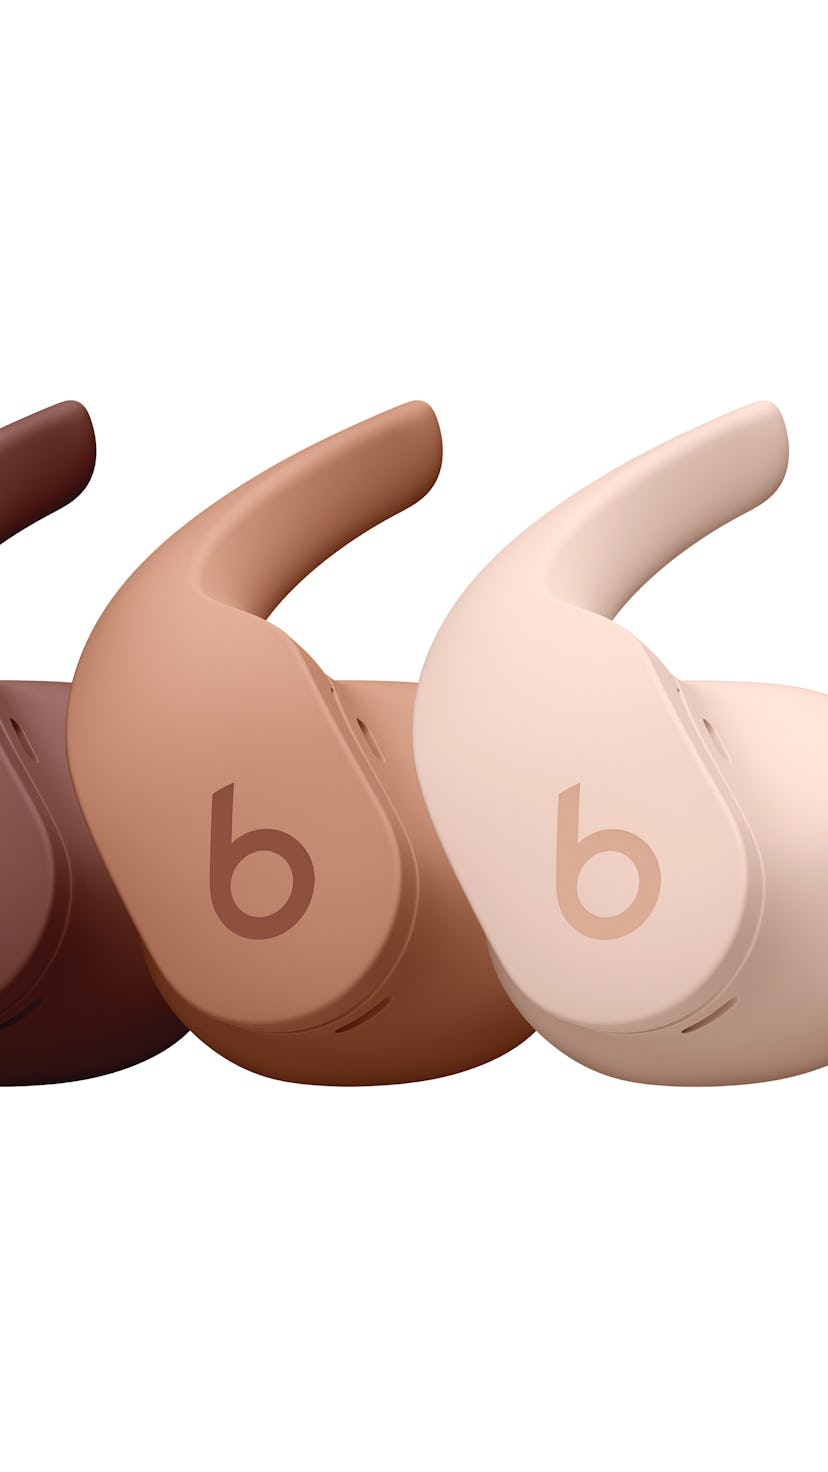 Beats x Kim is available in three, neutral shades.